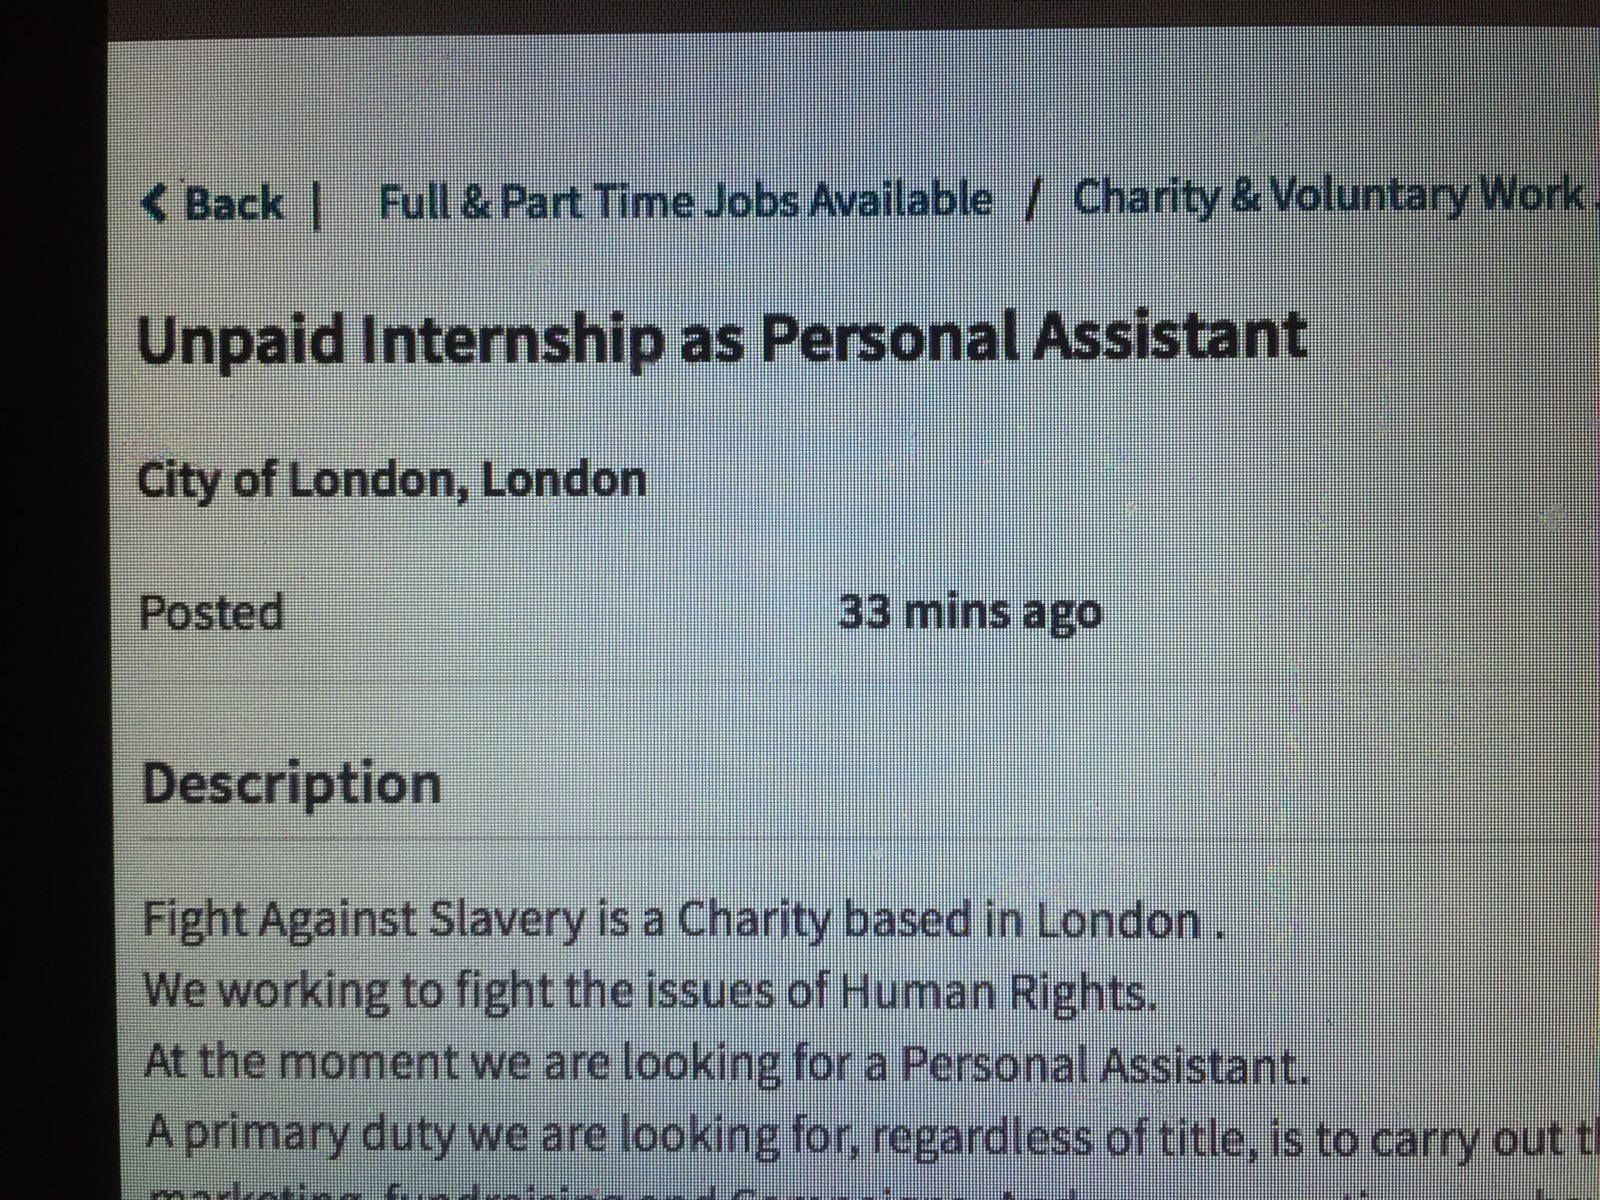 This charity might want to take a long, hard look at itself